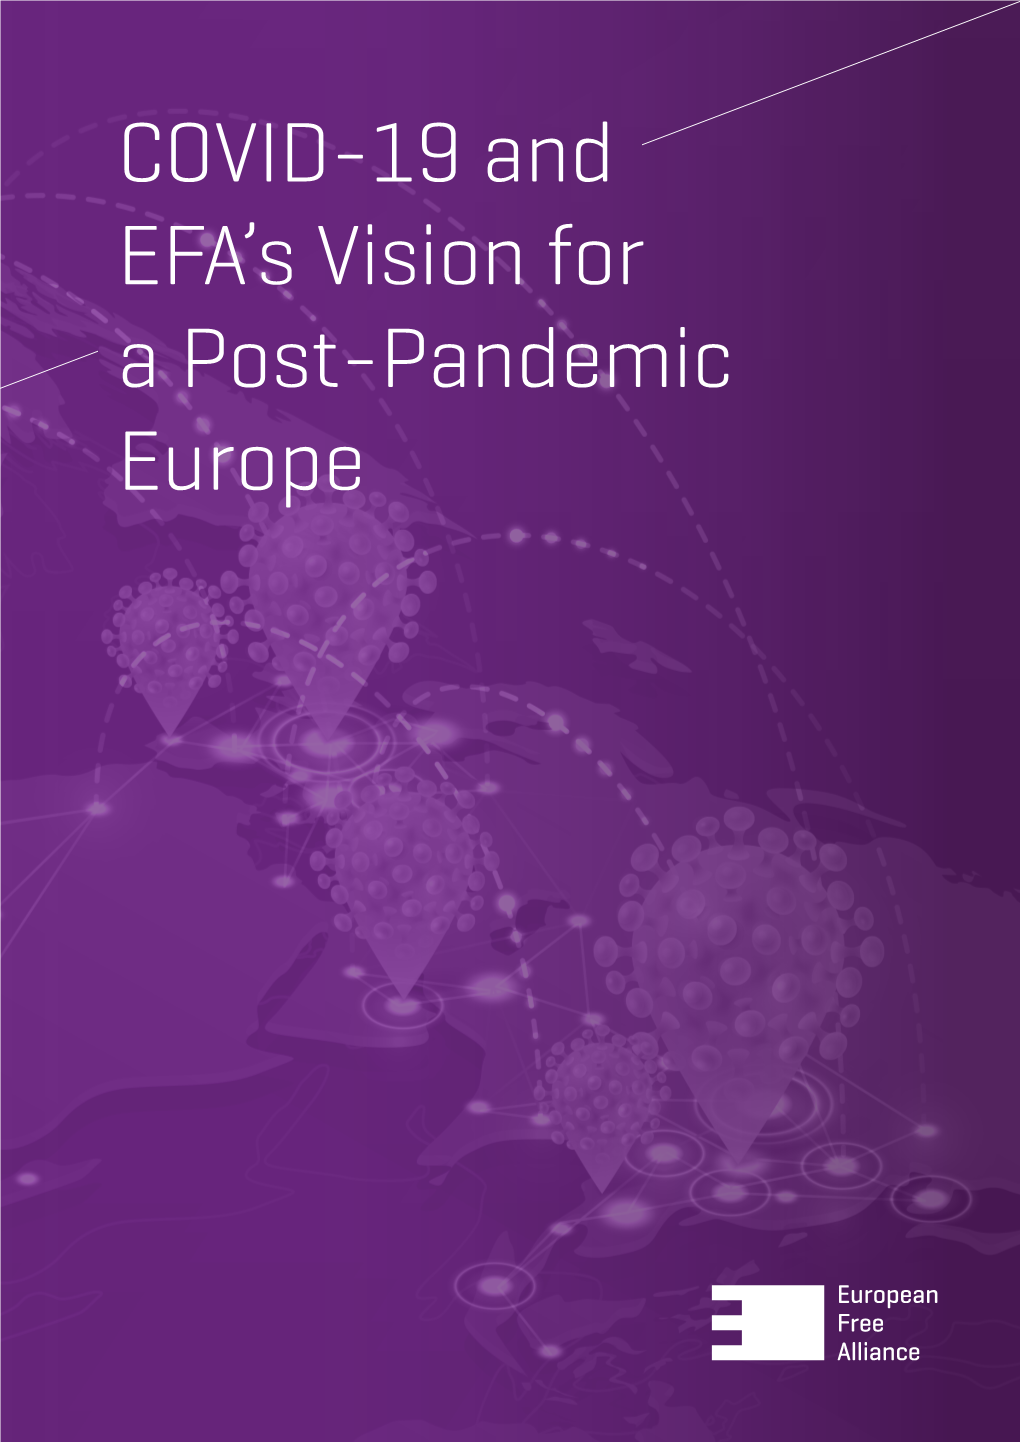 COVID-19 and EFA's Vision for a Post-Pandemic Europe